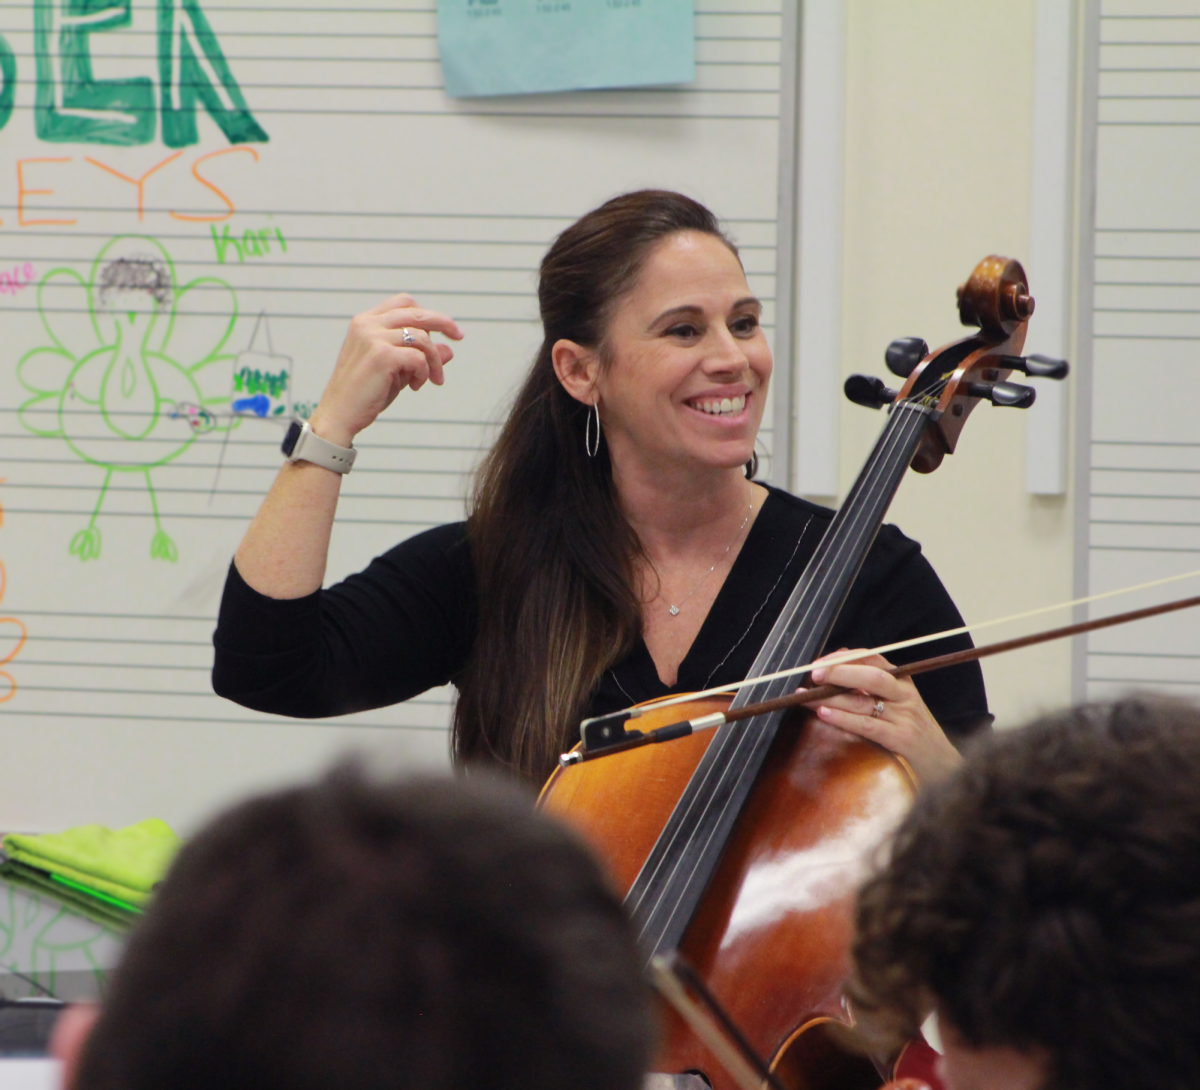 Orchestra teacher Melissa Meyers snaps to keep the rhythm. Her students play in sync forming a harmony that resonates down the music wing.